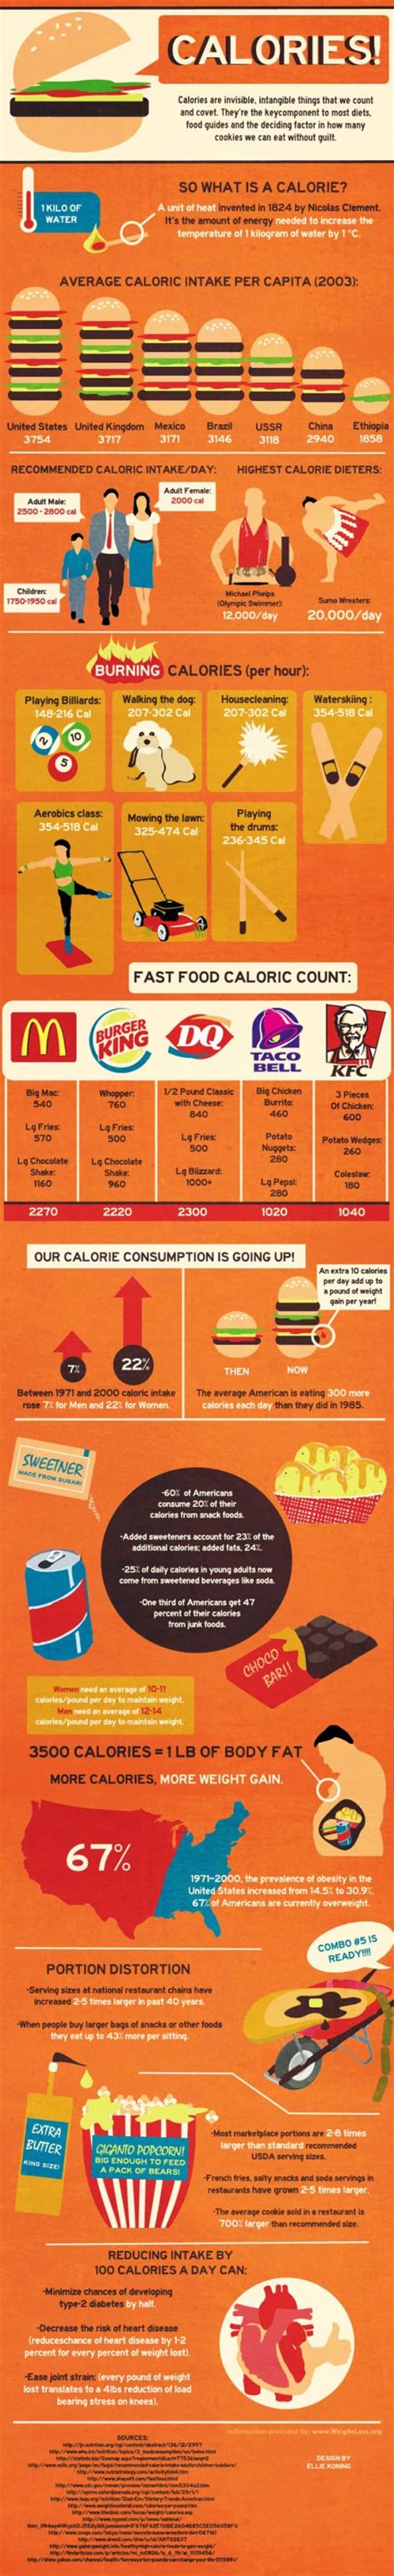 The Facts About Calories Infographic Mindbodygreen